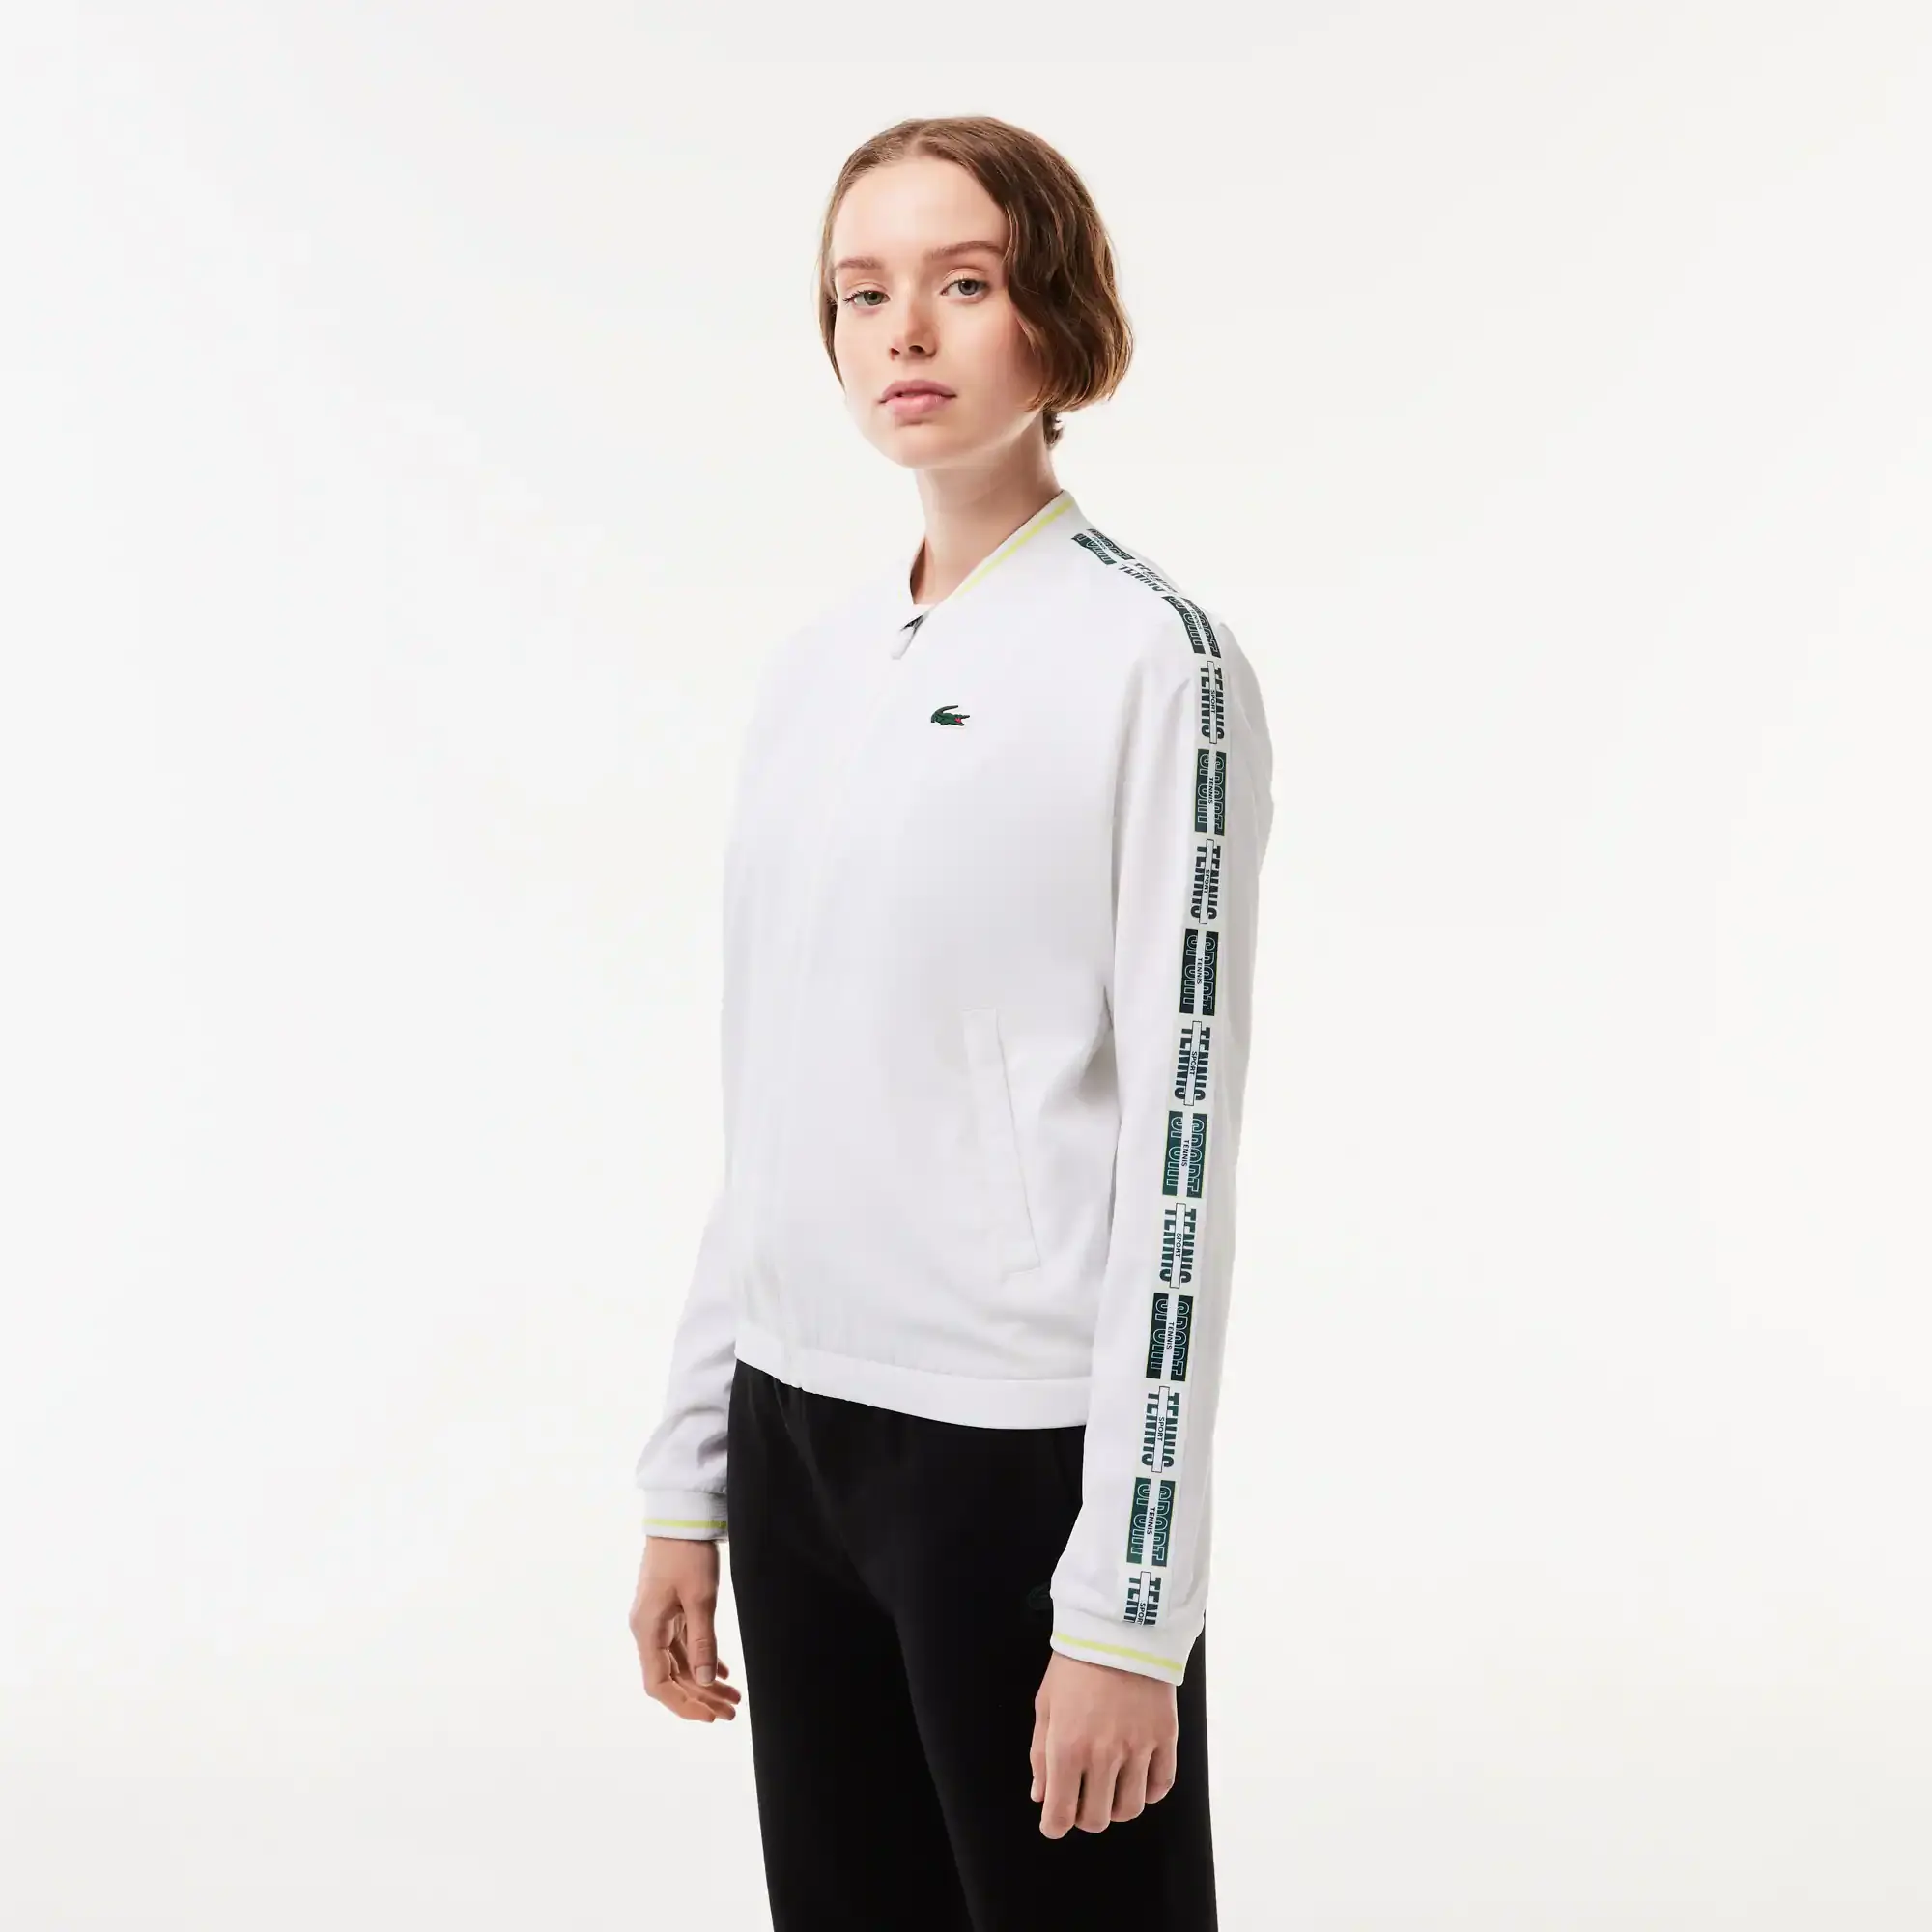 Lacoste Women's Recycled Fiber Stretch Tennis Jacket. 1